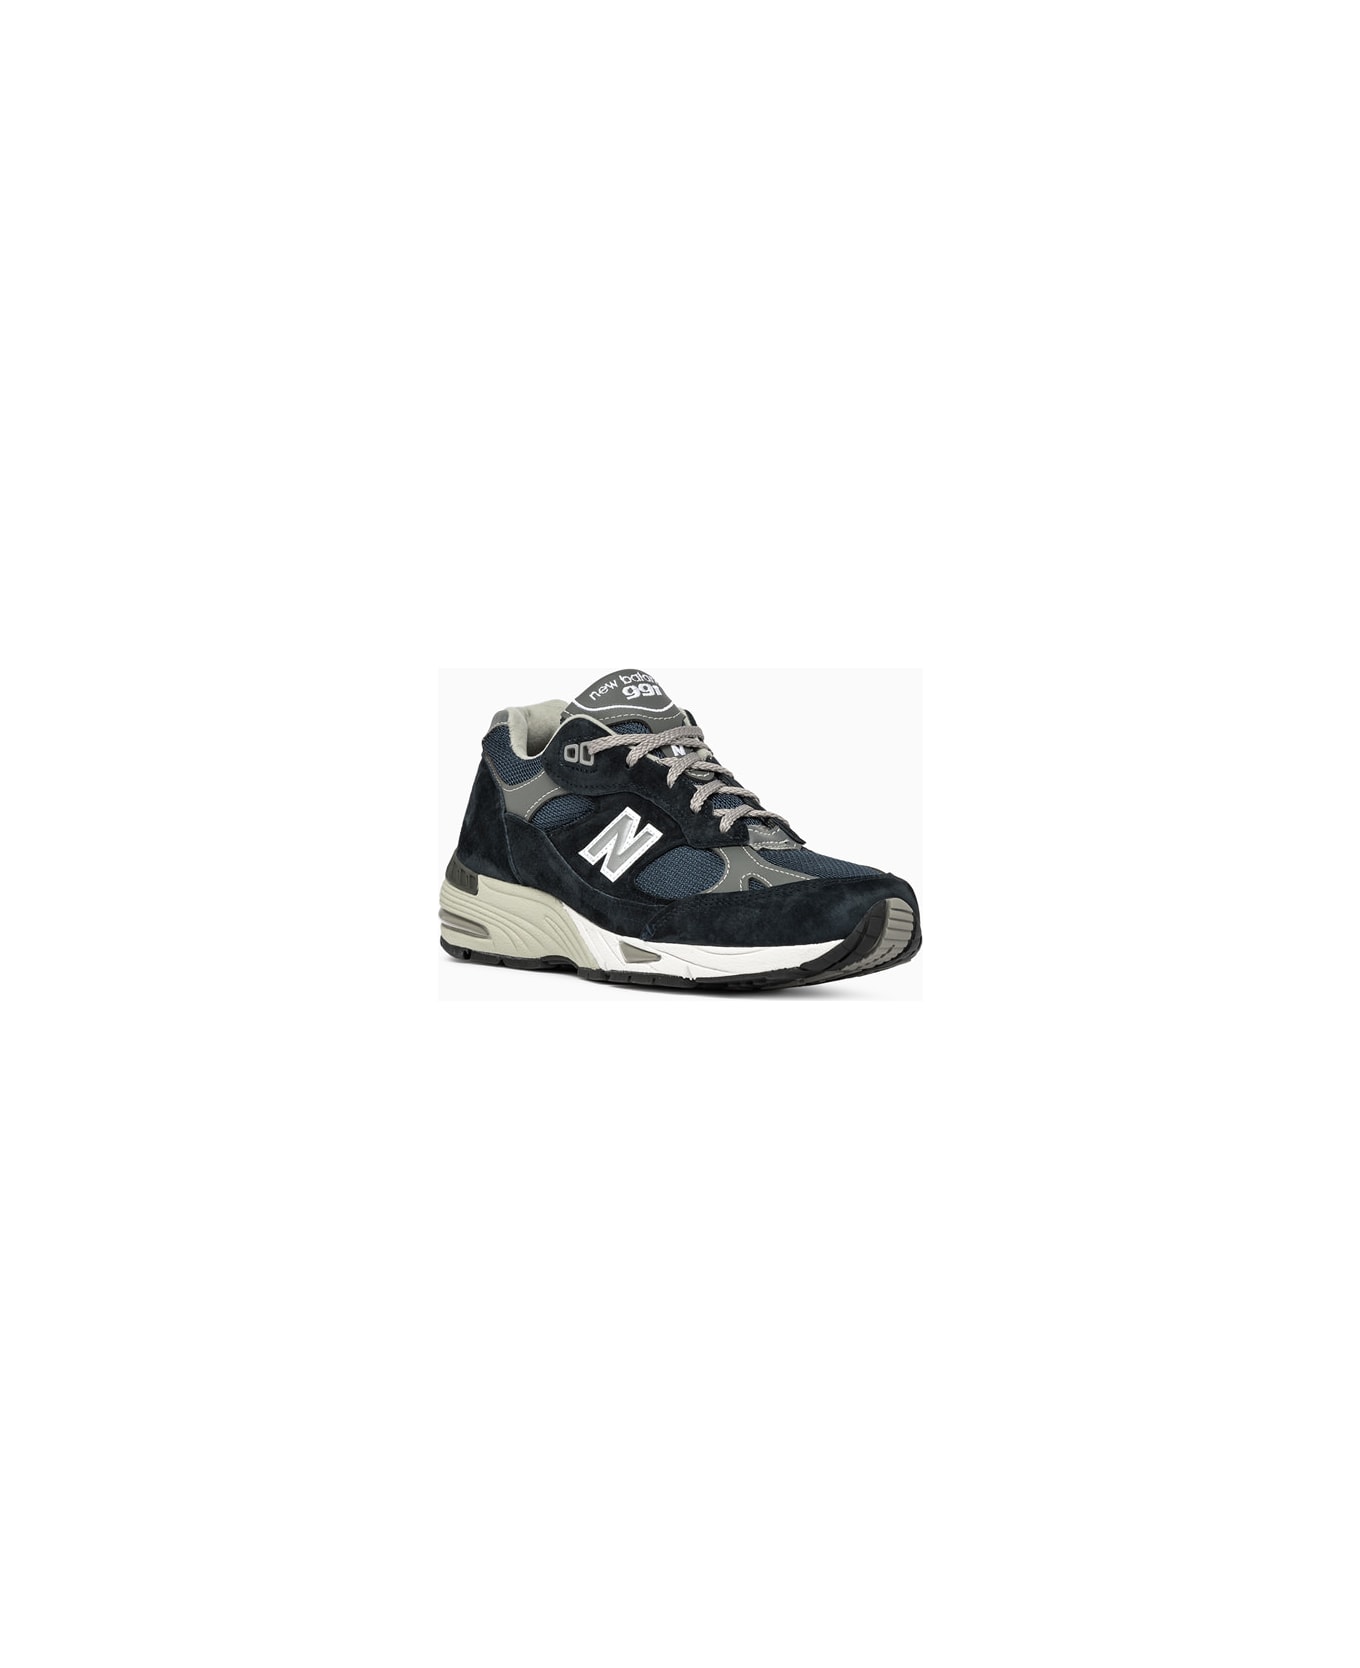 New Balance 991v1 Made In Uk Sneakers W991nv - Blue スニーカー